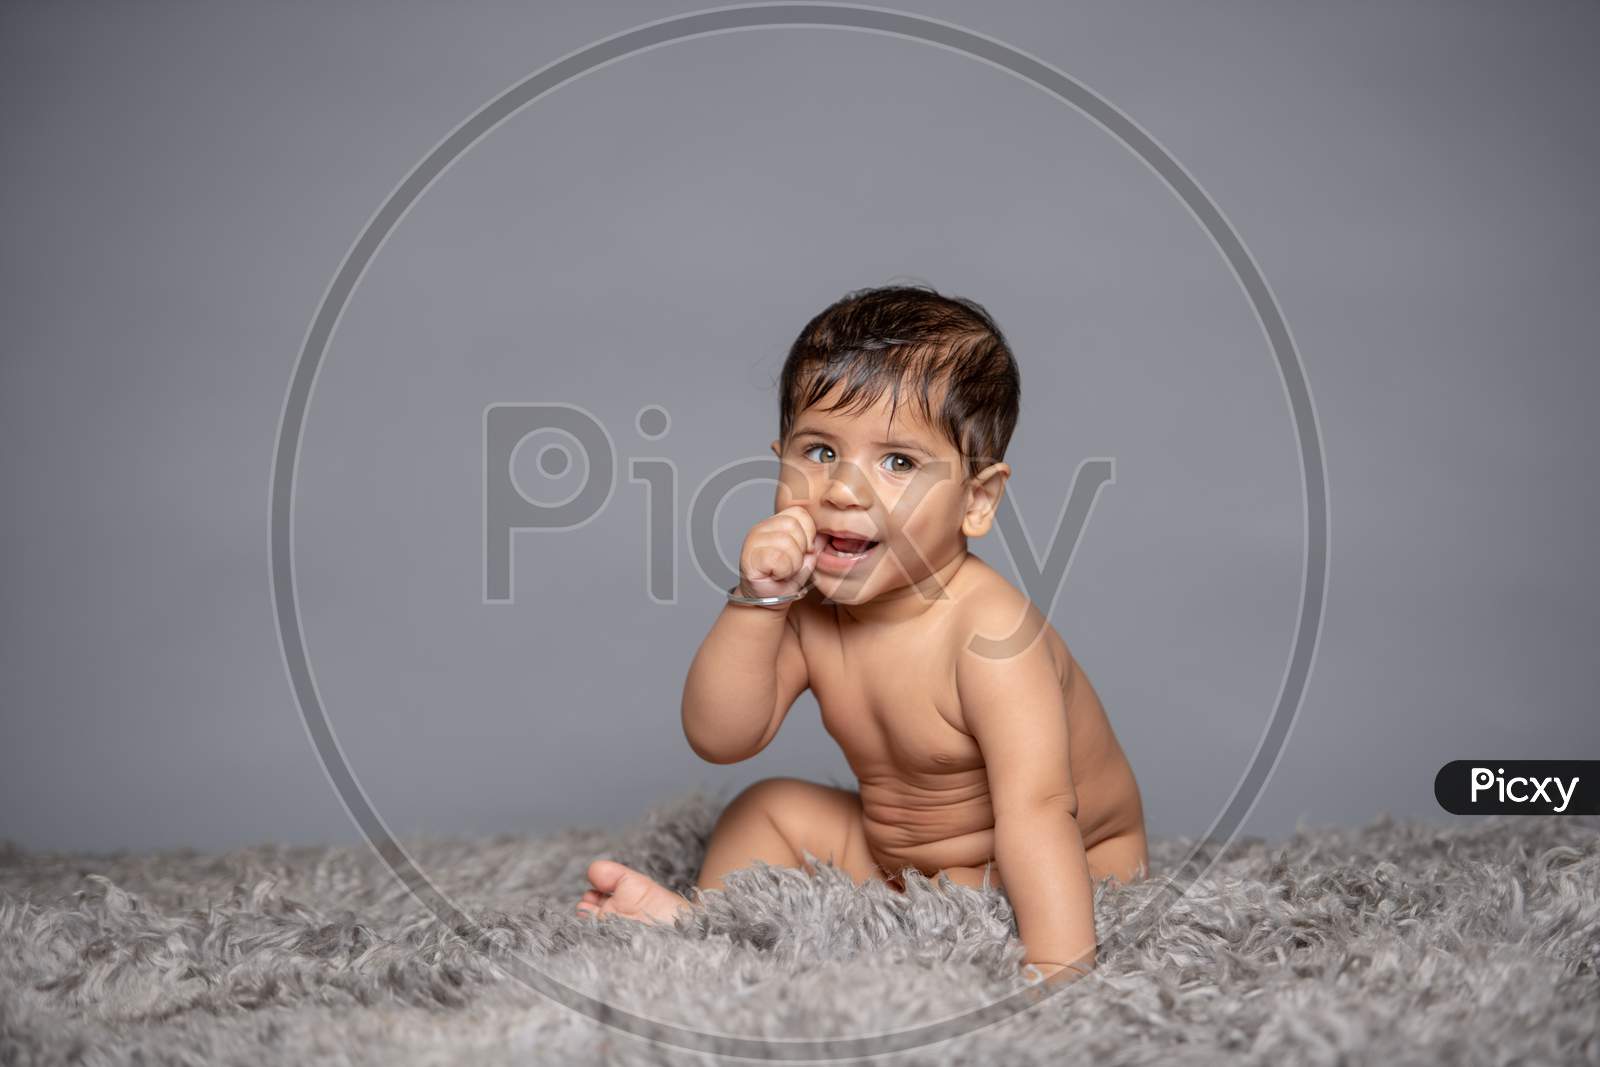 Adorable Cute Little Girl Child Playing With Toys over a Gray Background